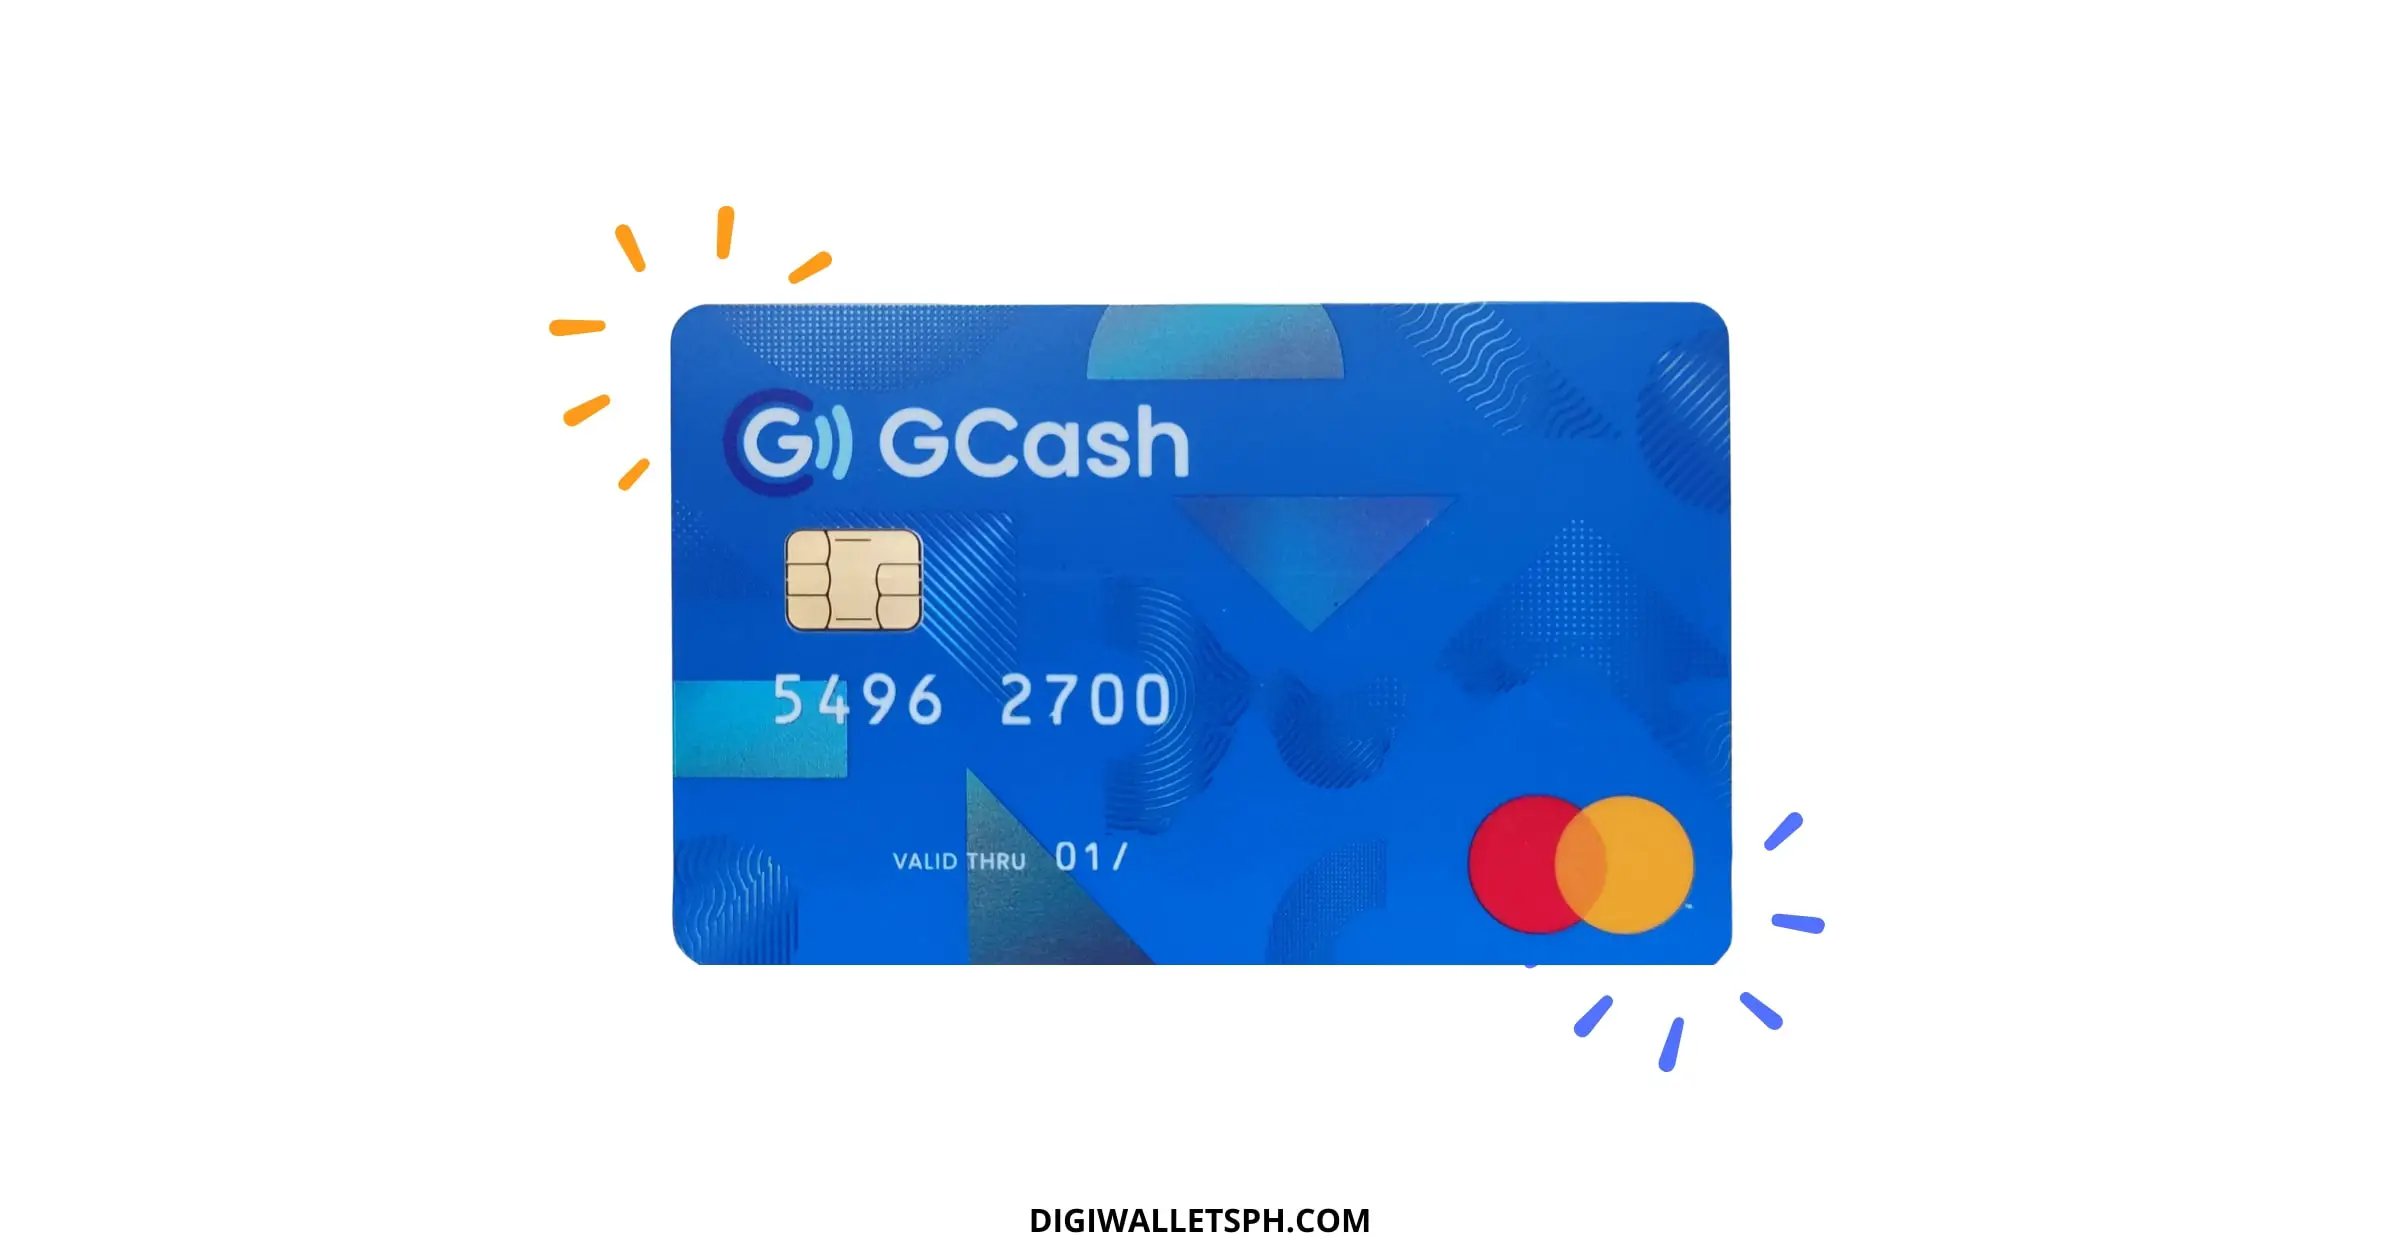 How to get a GCash Mastercard